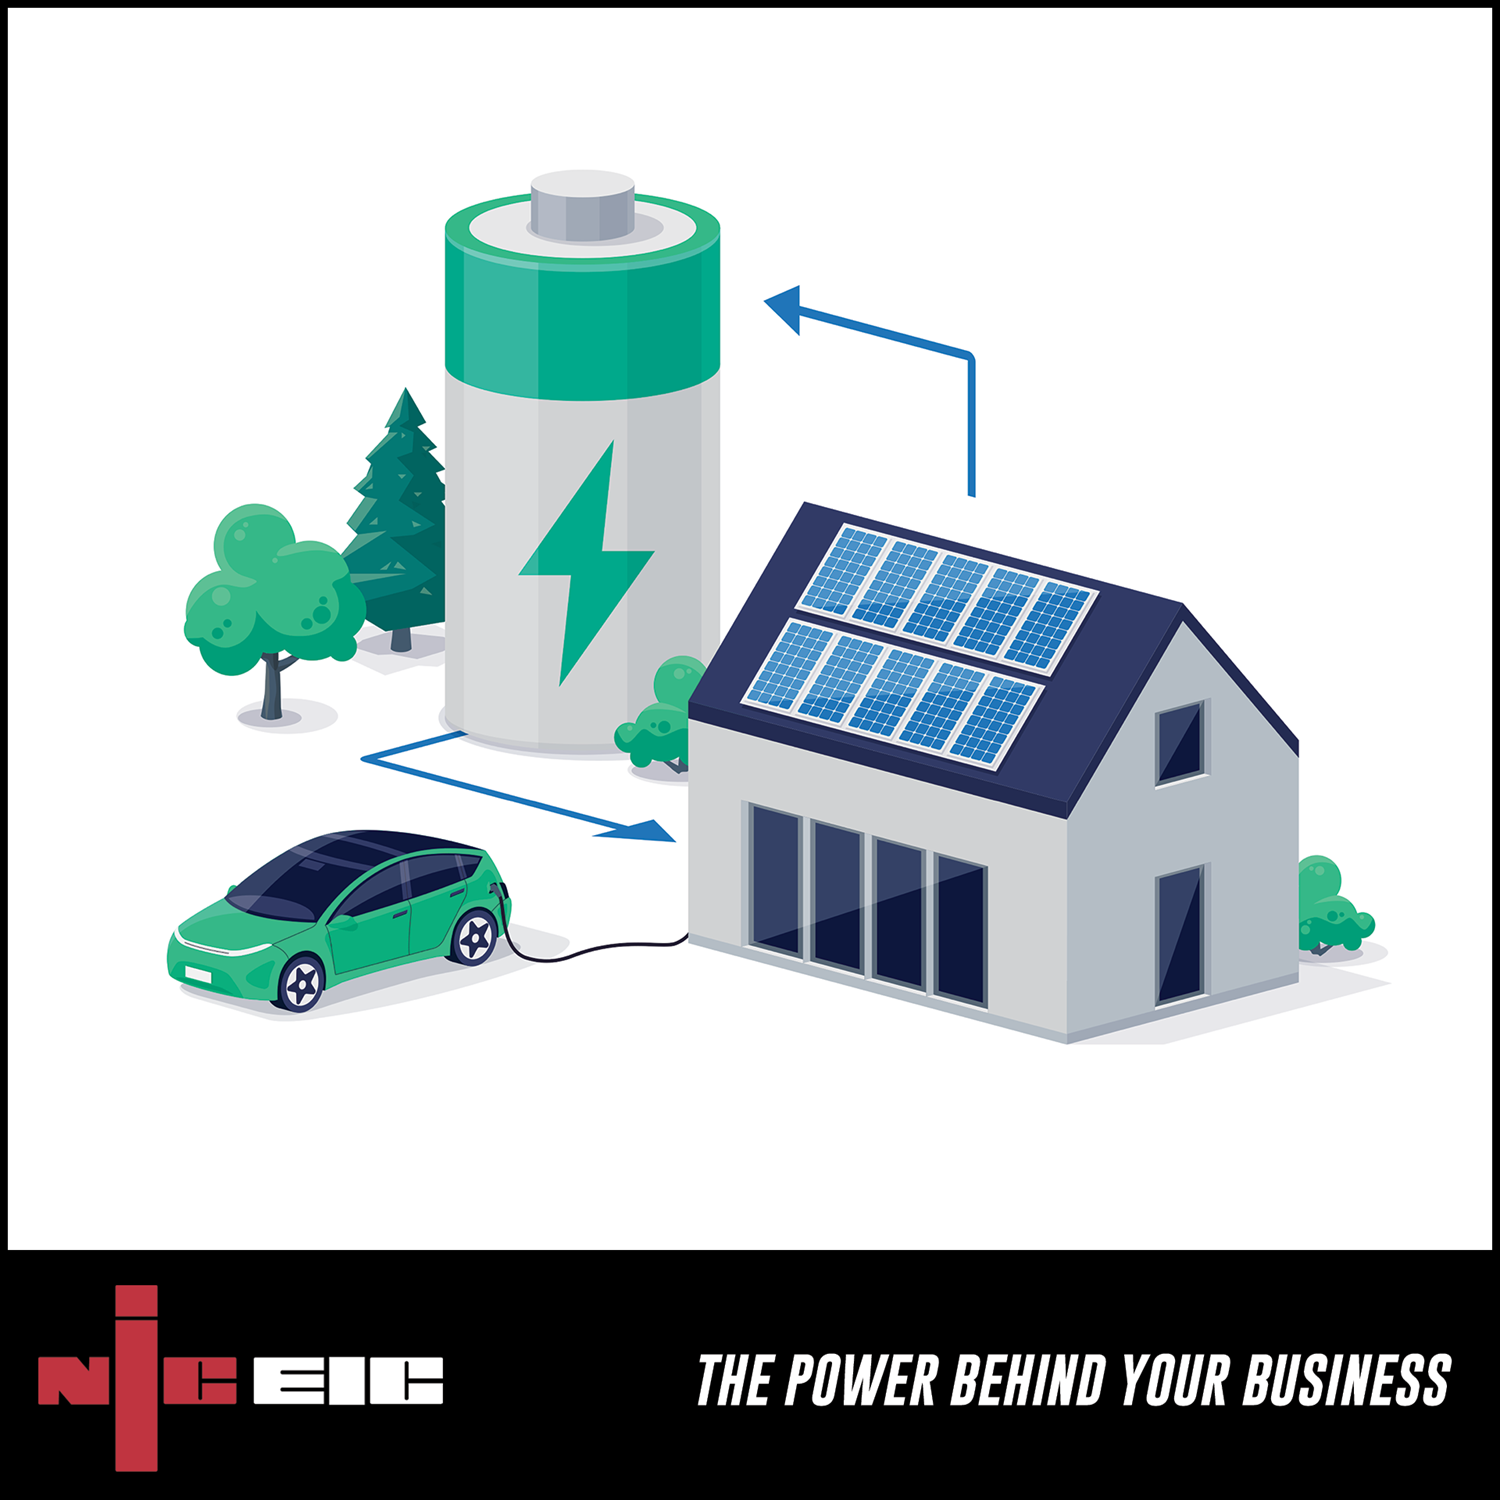 An NICEIC image showing the benefits of Electrical Energy Storage Systems